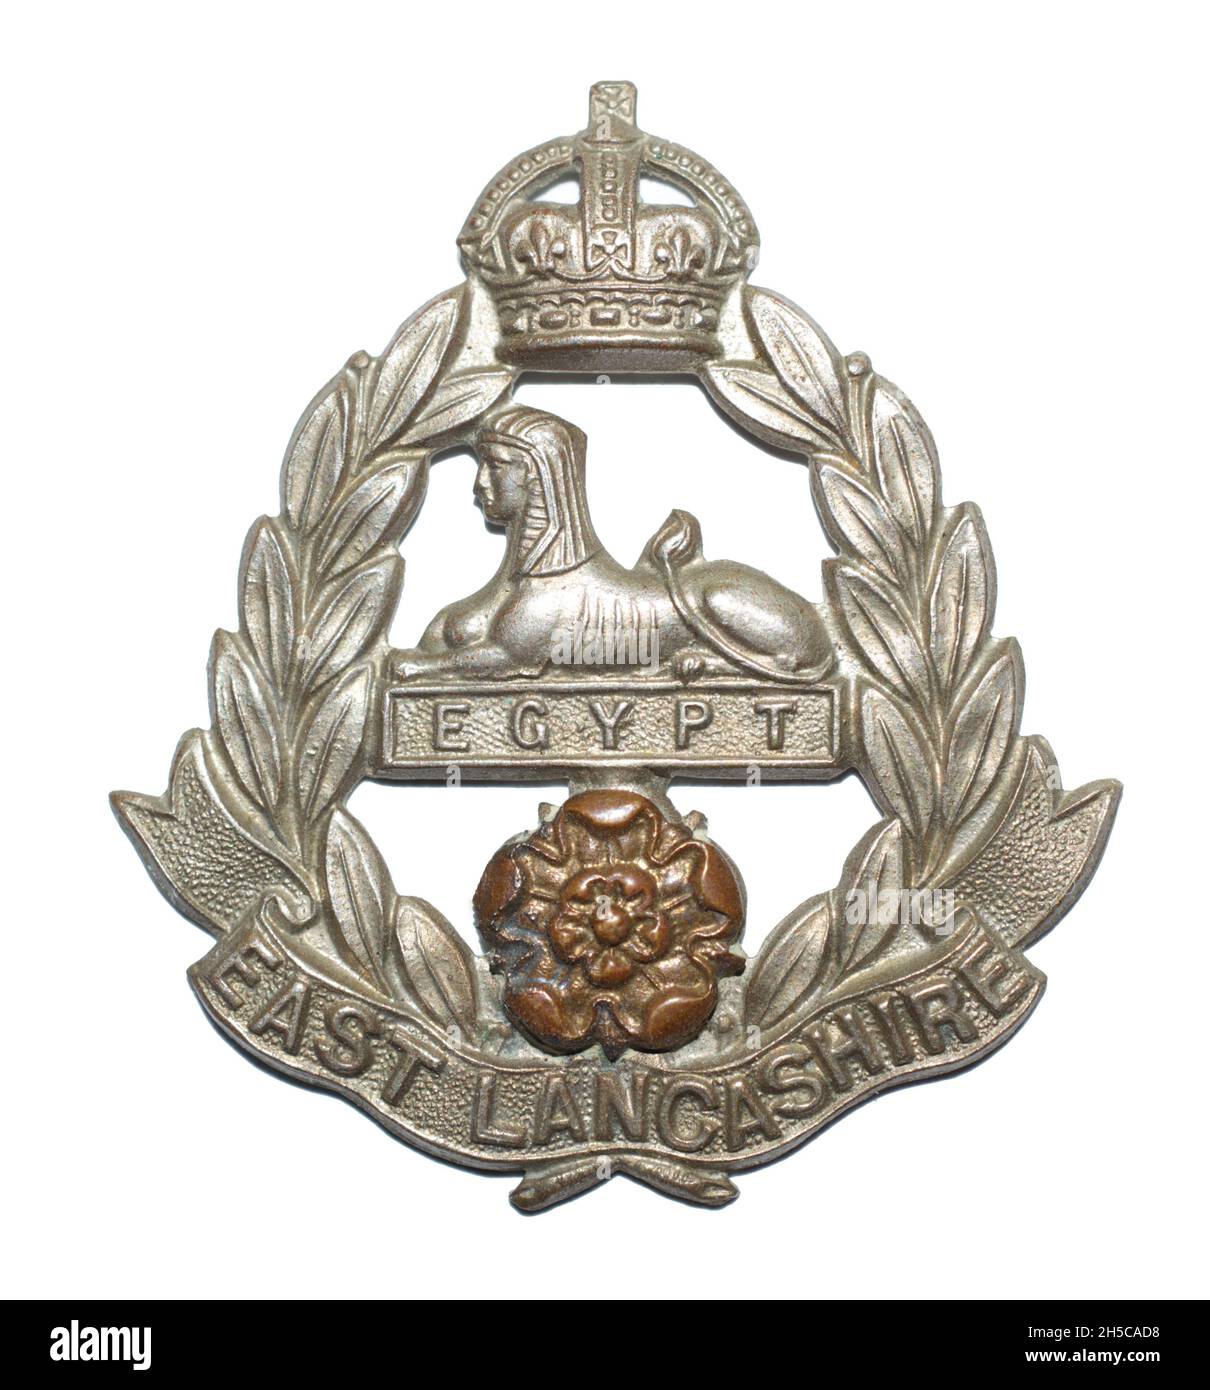 The cap badge of the East Lancashire Regiment, as issued between 1901-1958. The regiment saw active service in both World Wars. Stock Photo